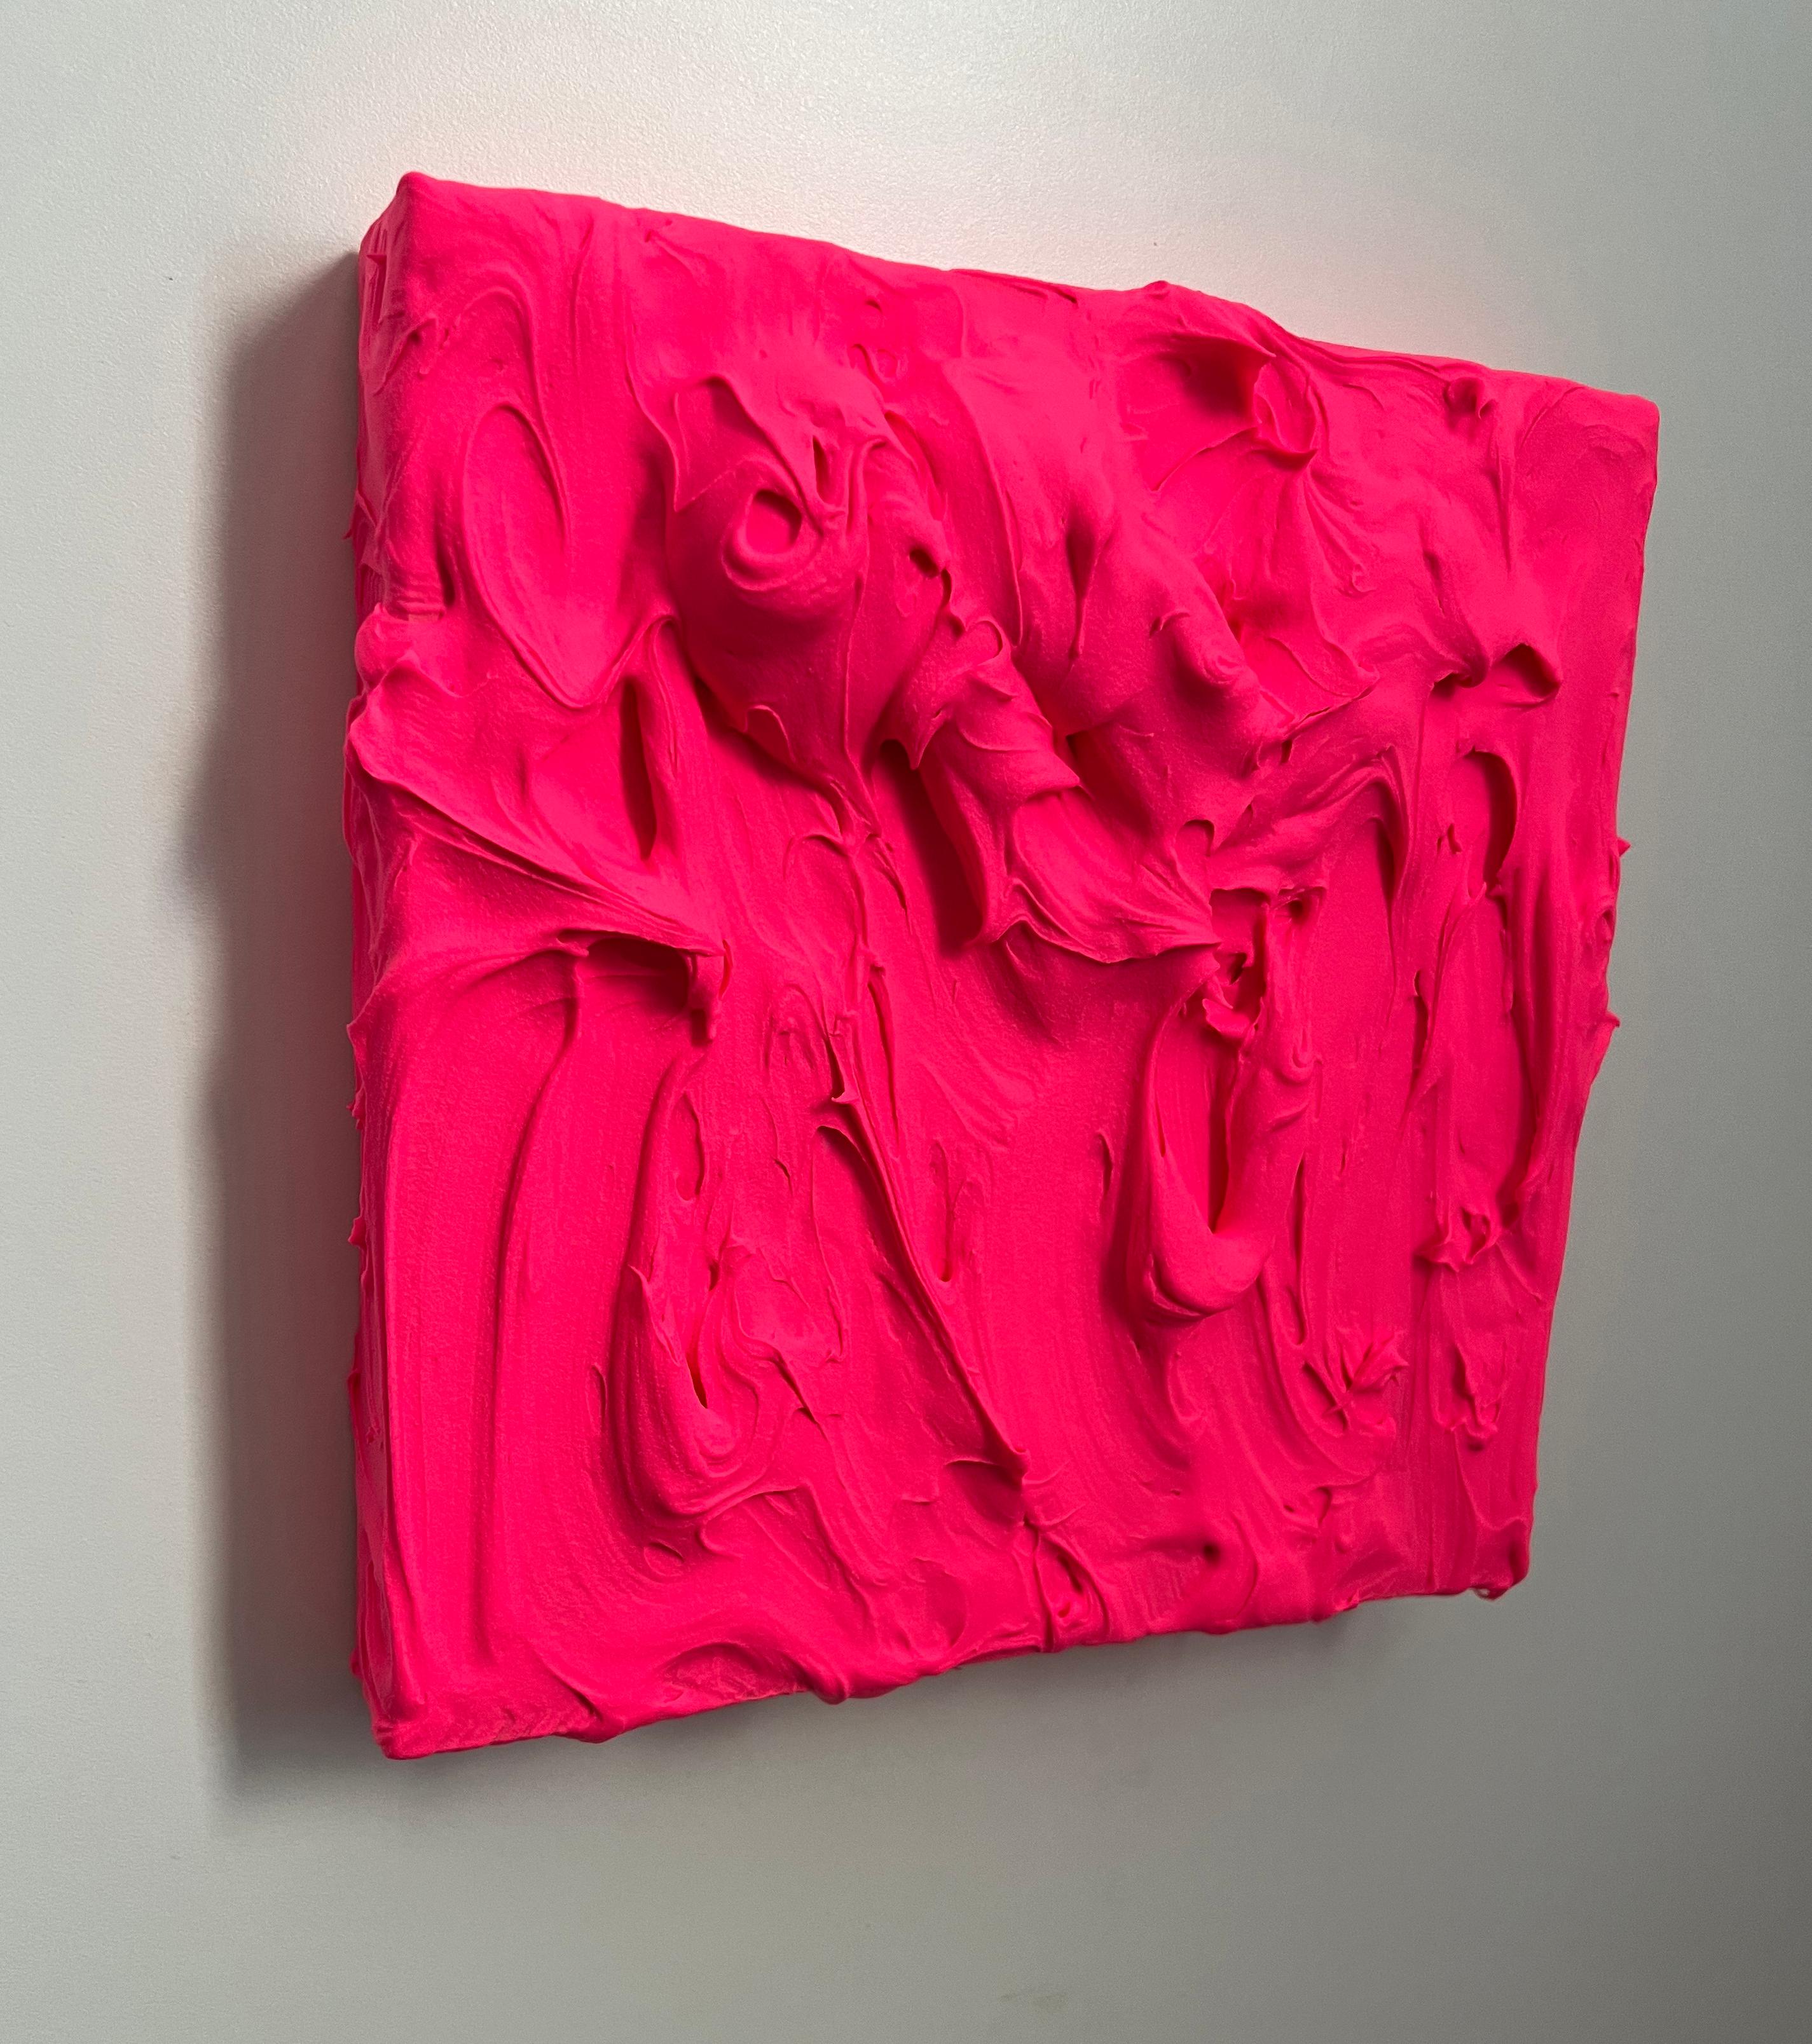 Electric Pink Excess 3 (thick impasto painting monochrome pop art square design) - Painting by Chloe Hedden